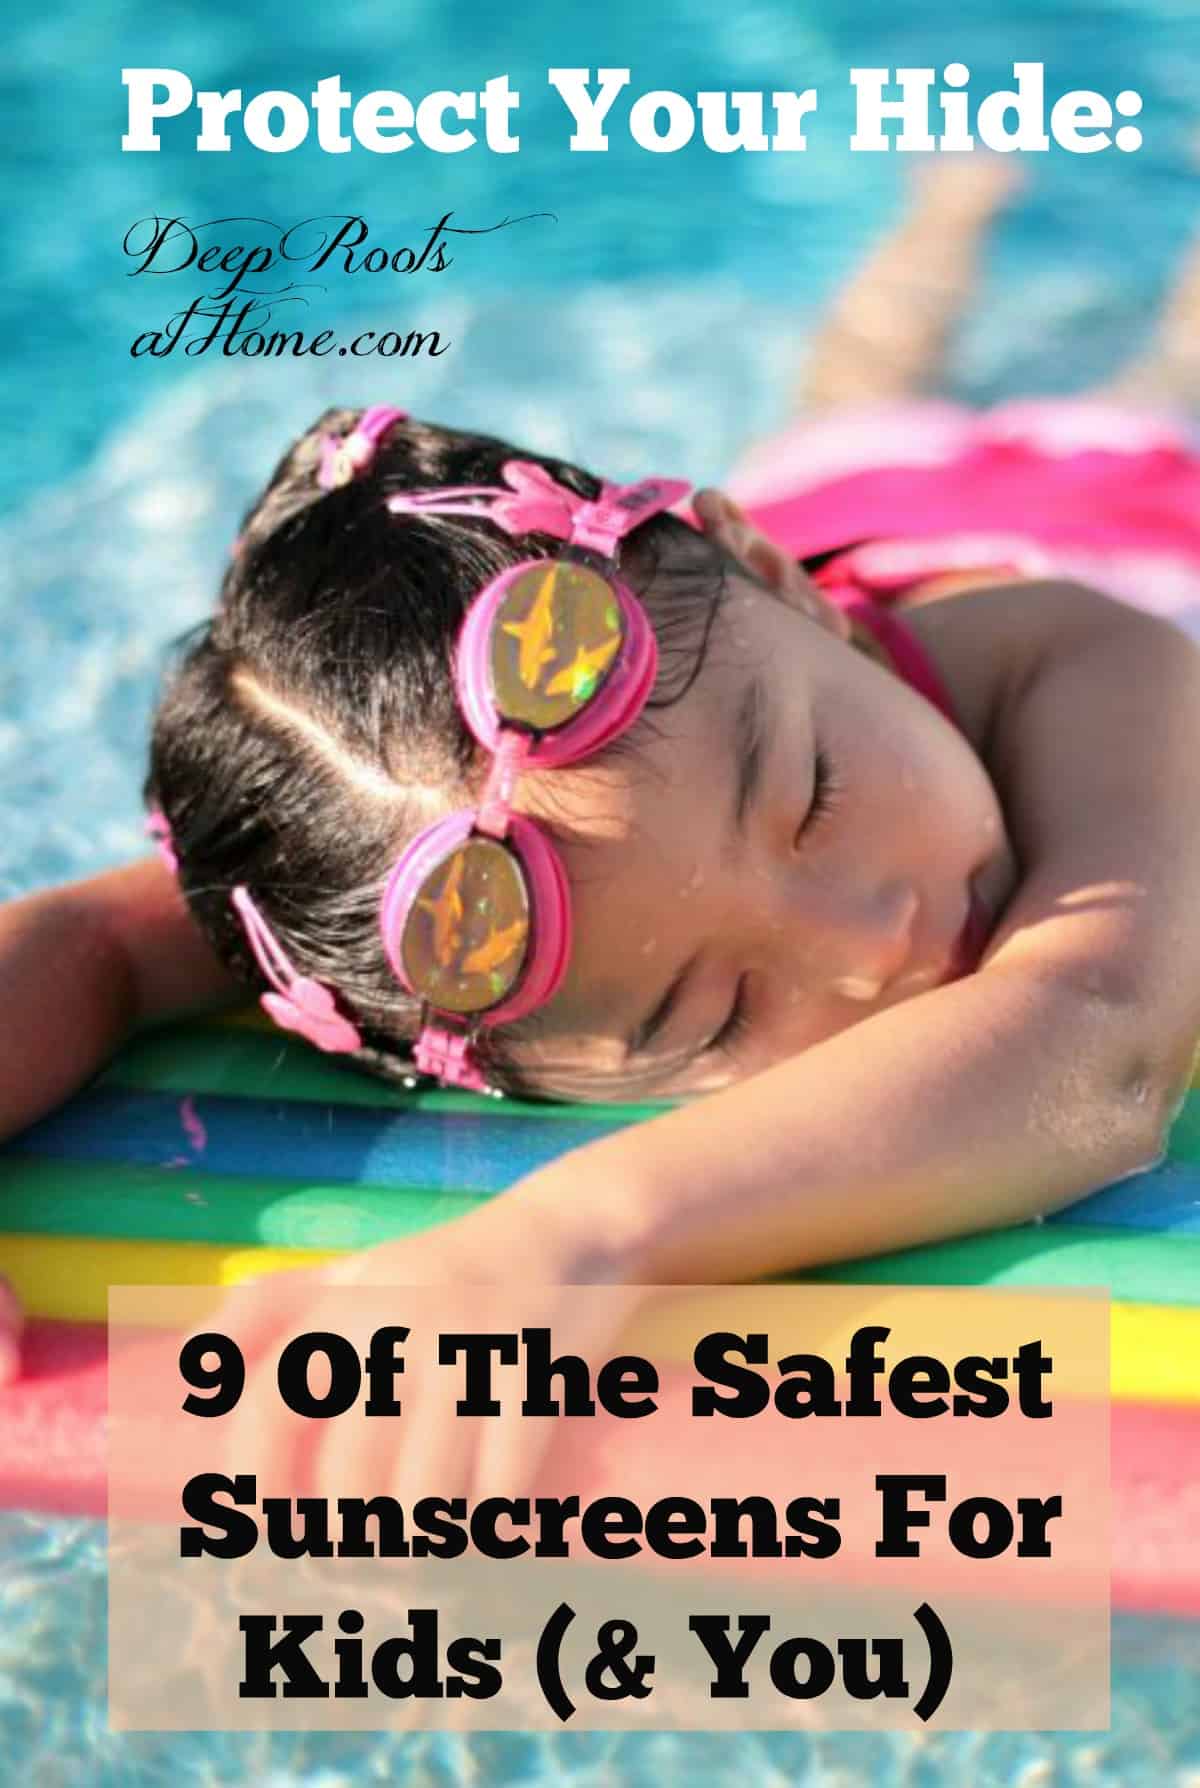 Protect Your Hide: 9 Of The Safest Sunscreens For Kids (& You), Protect Your Hide: 9 Of The Safest Sunscreens For Kids (& You), little girl on raft in the hot sun